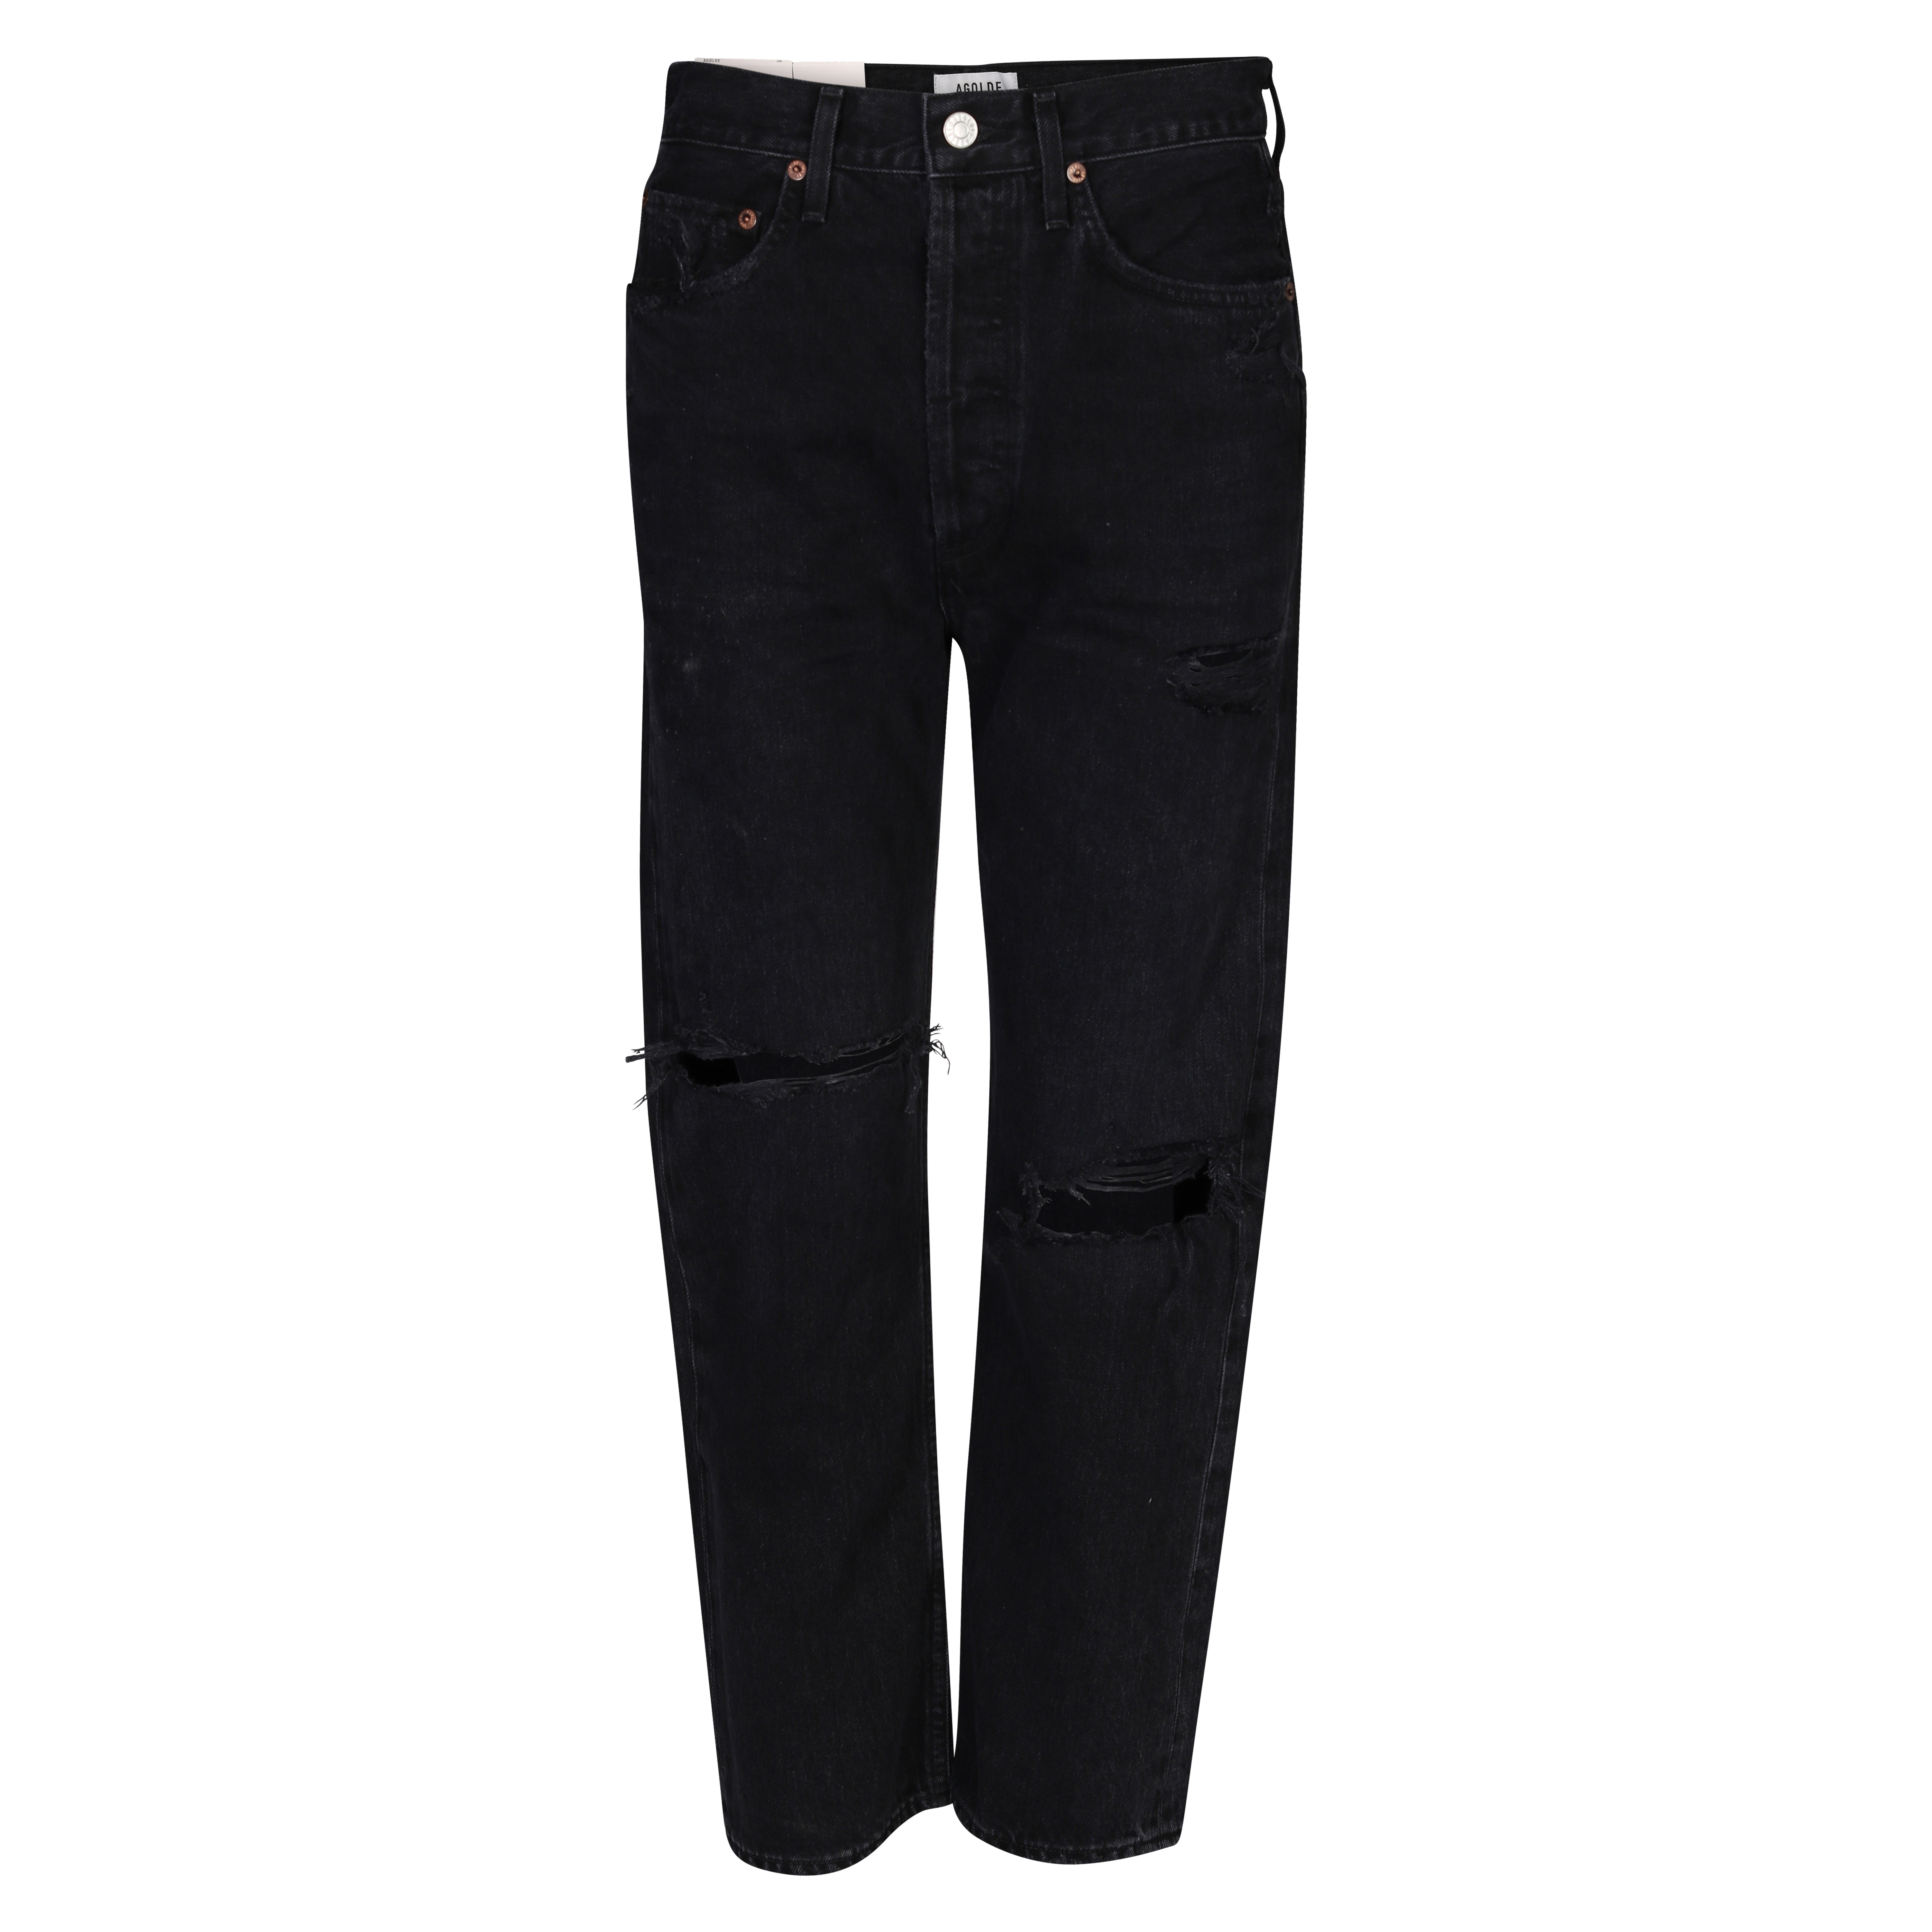 Agolde Jeans 90's Cropped in Black/Bauhaus Washed